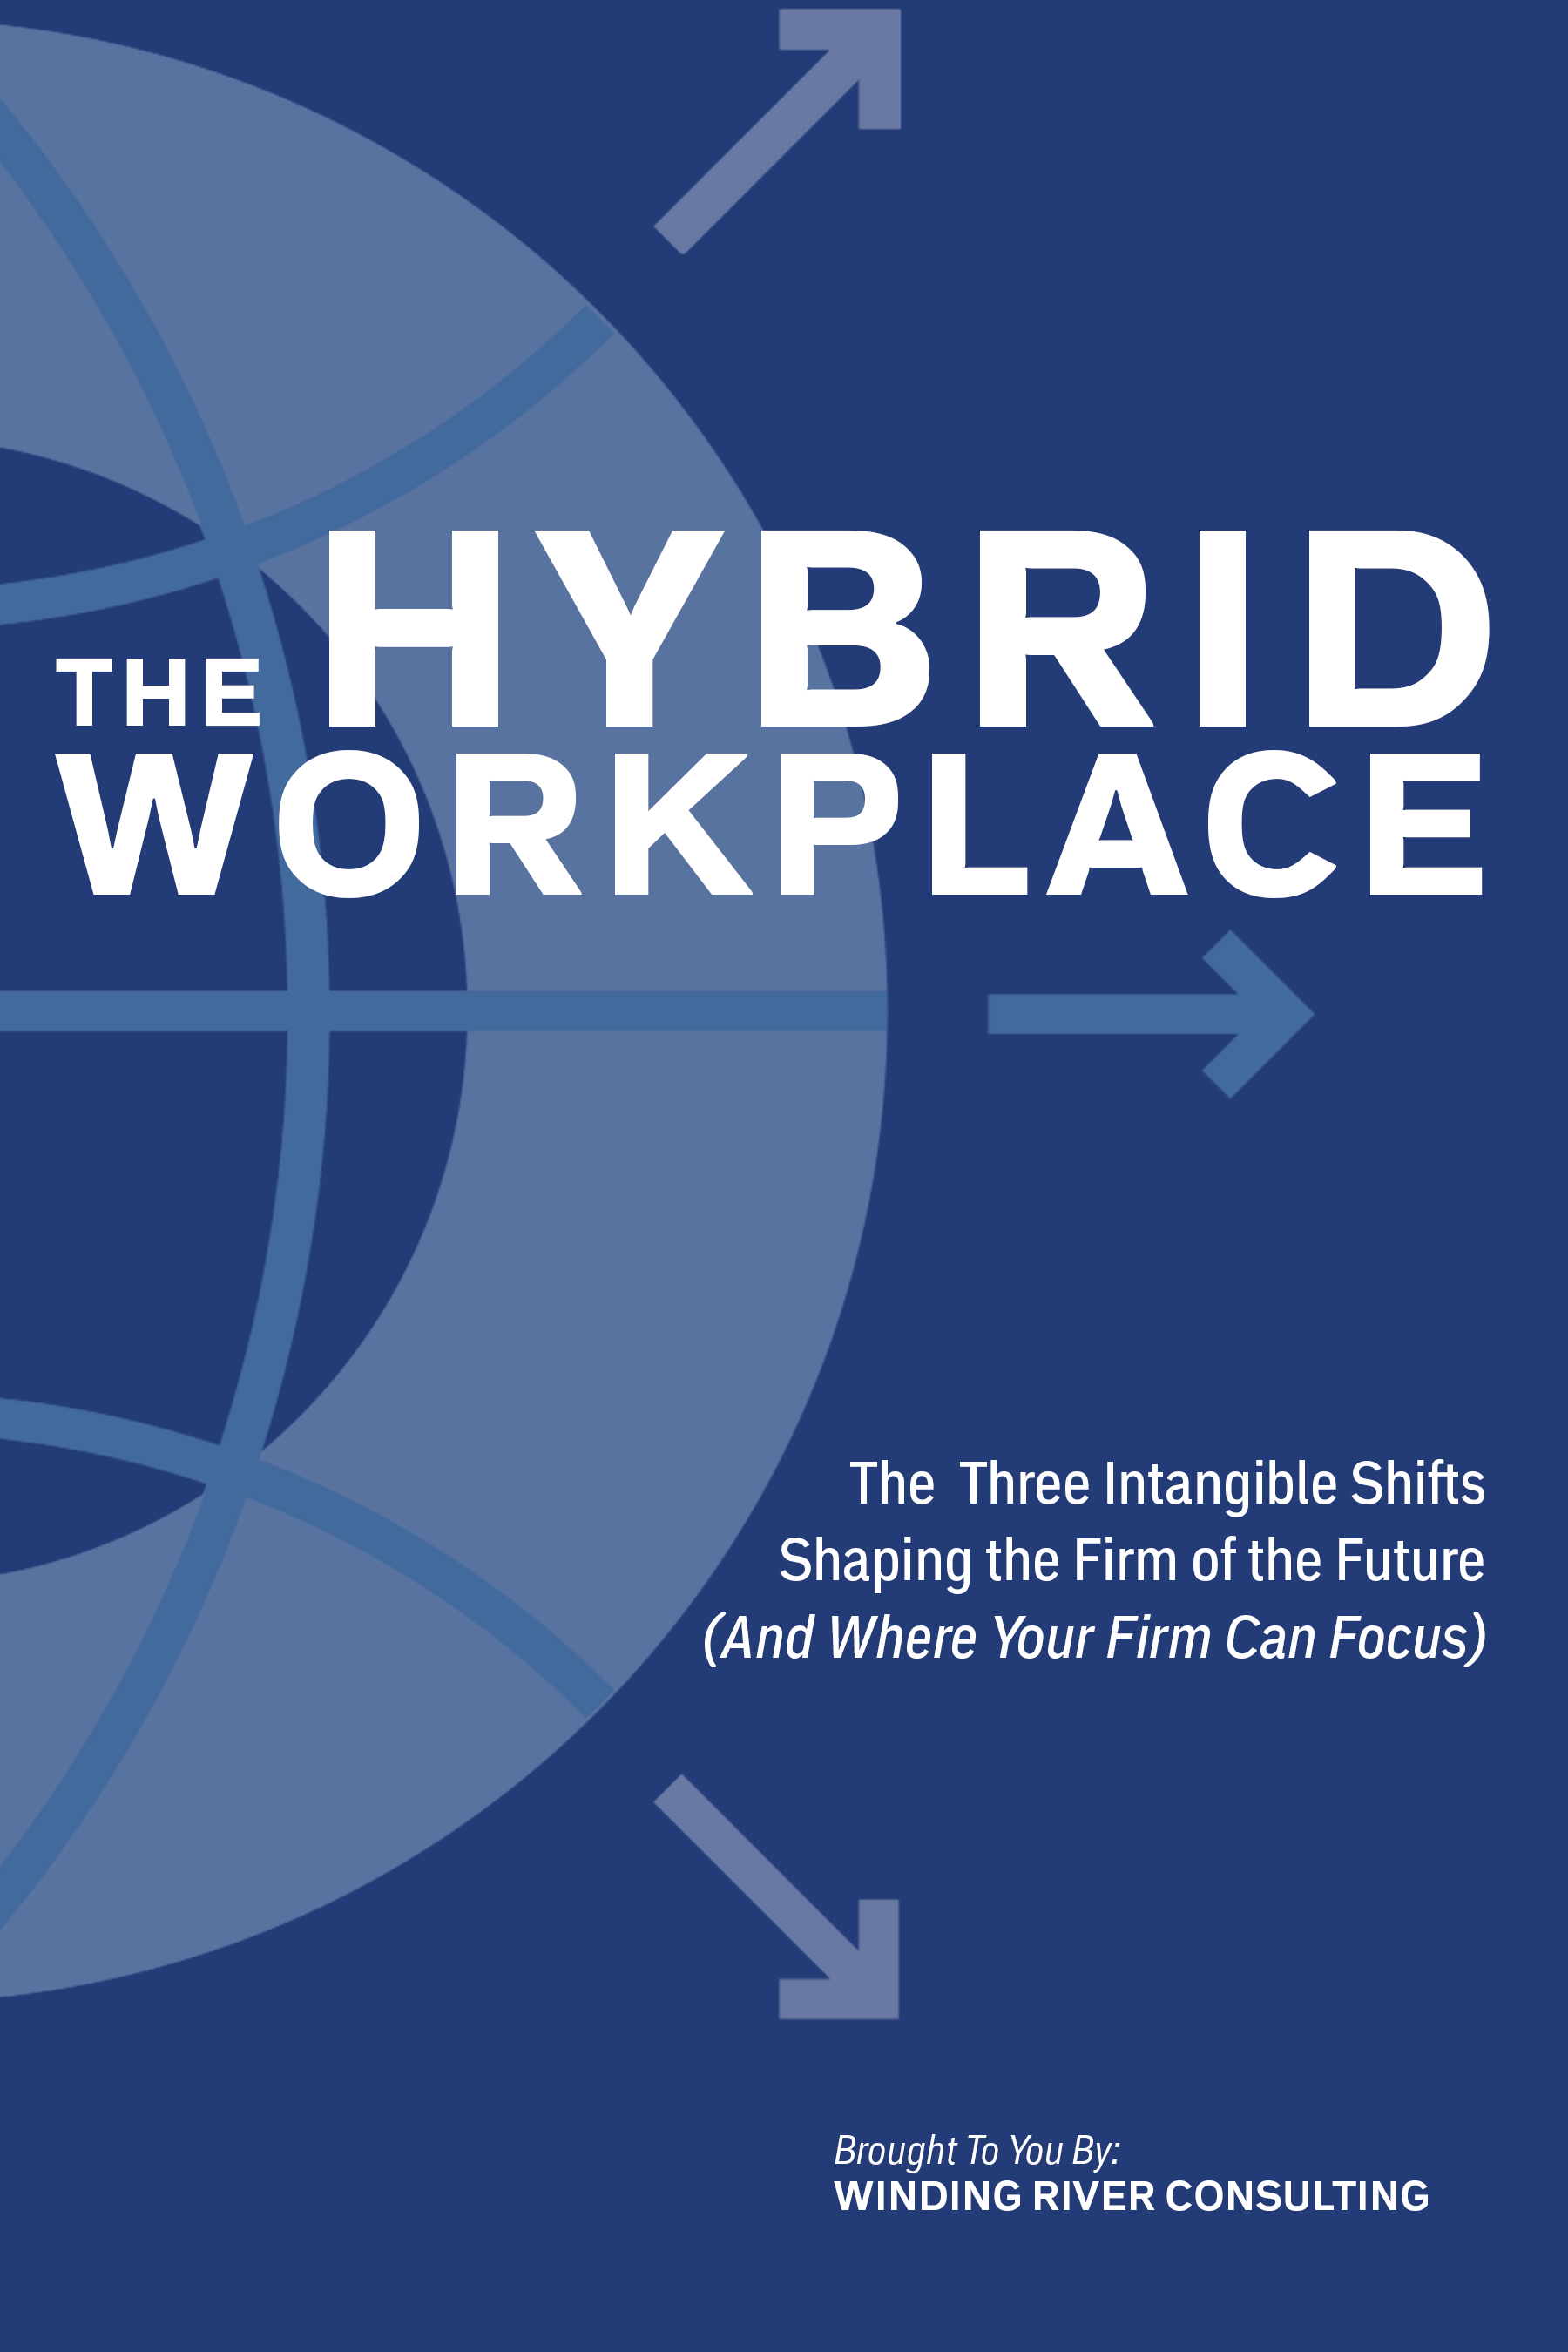 The Hybrid Workplace